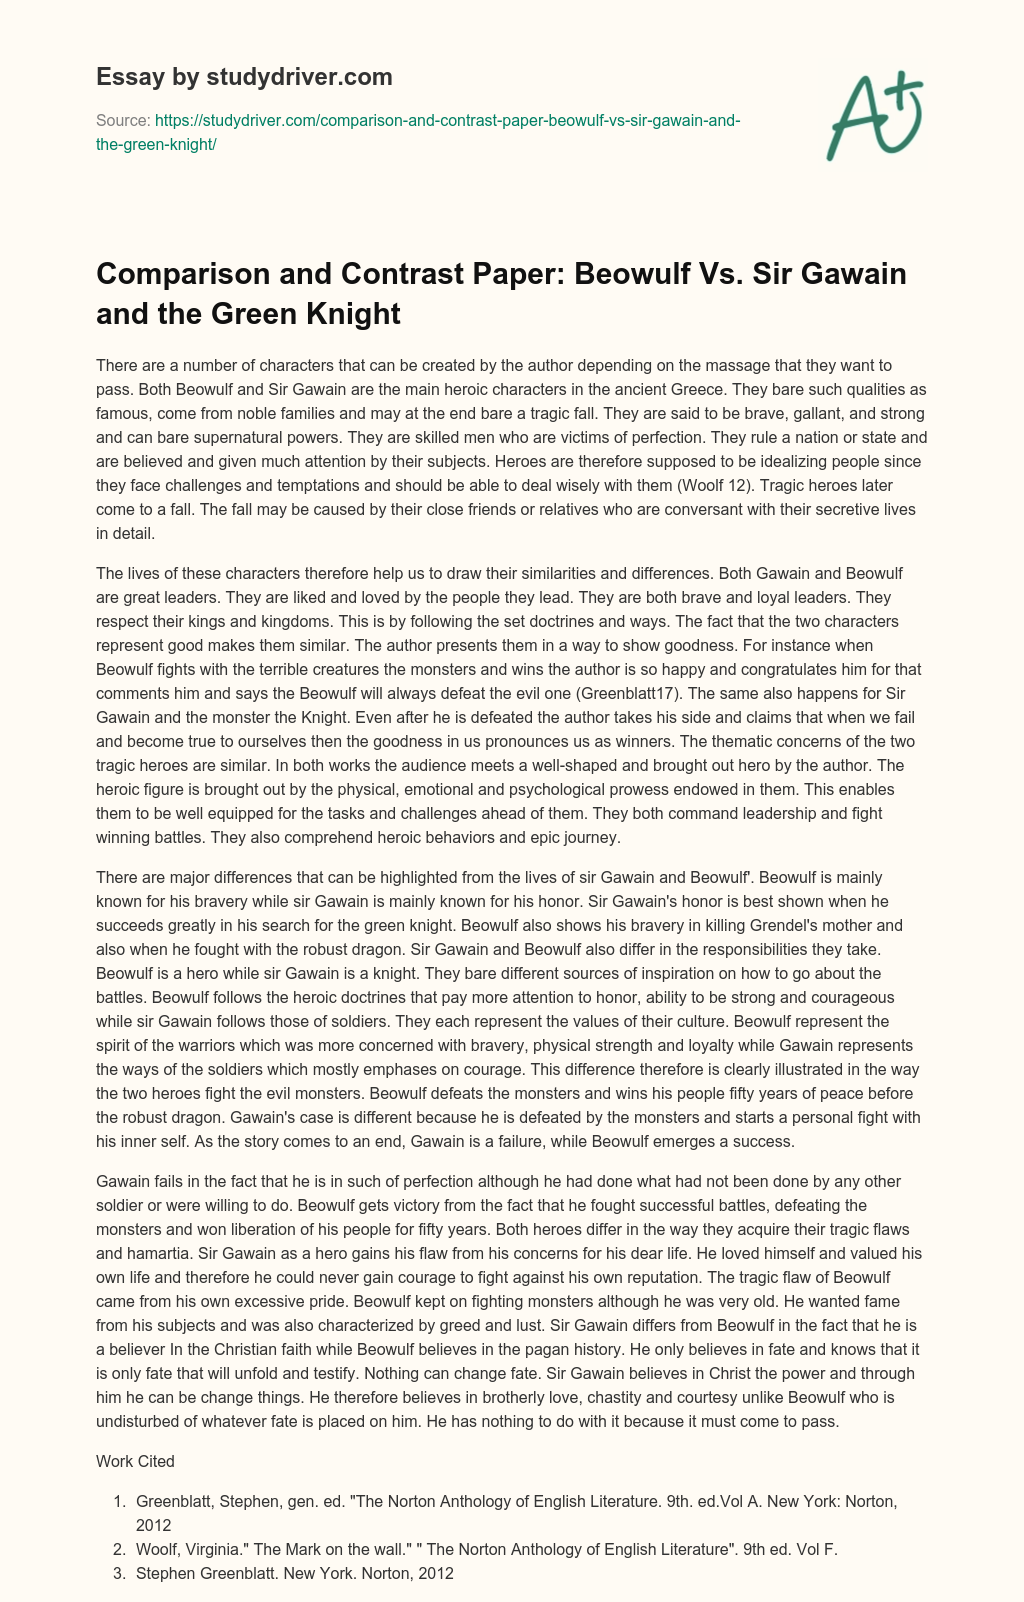 Comparison and Contrast Paper: Beowulf Vs. Sir Gawain and the Green Knight essay